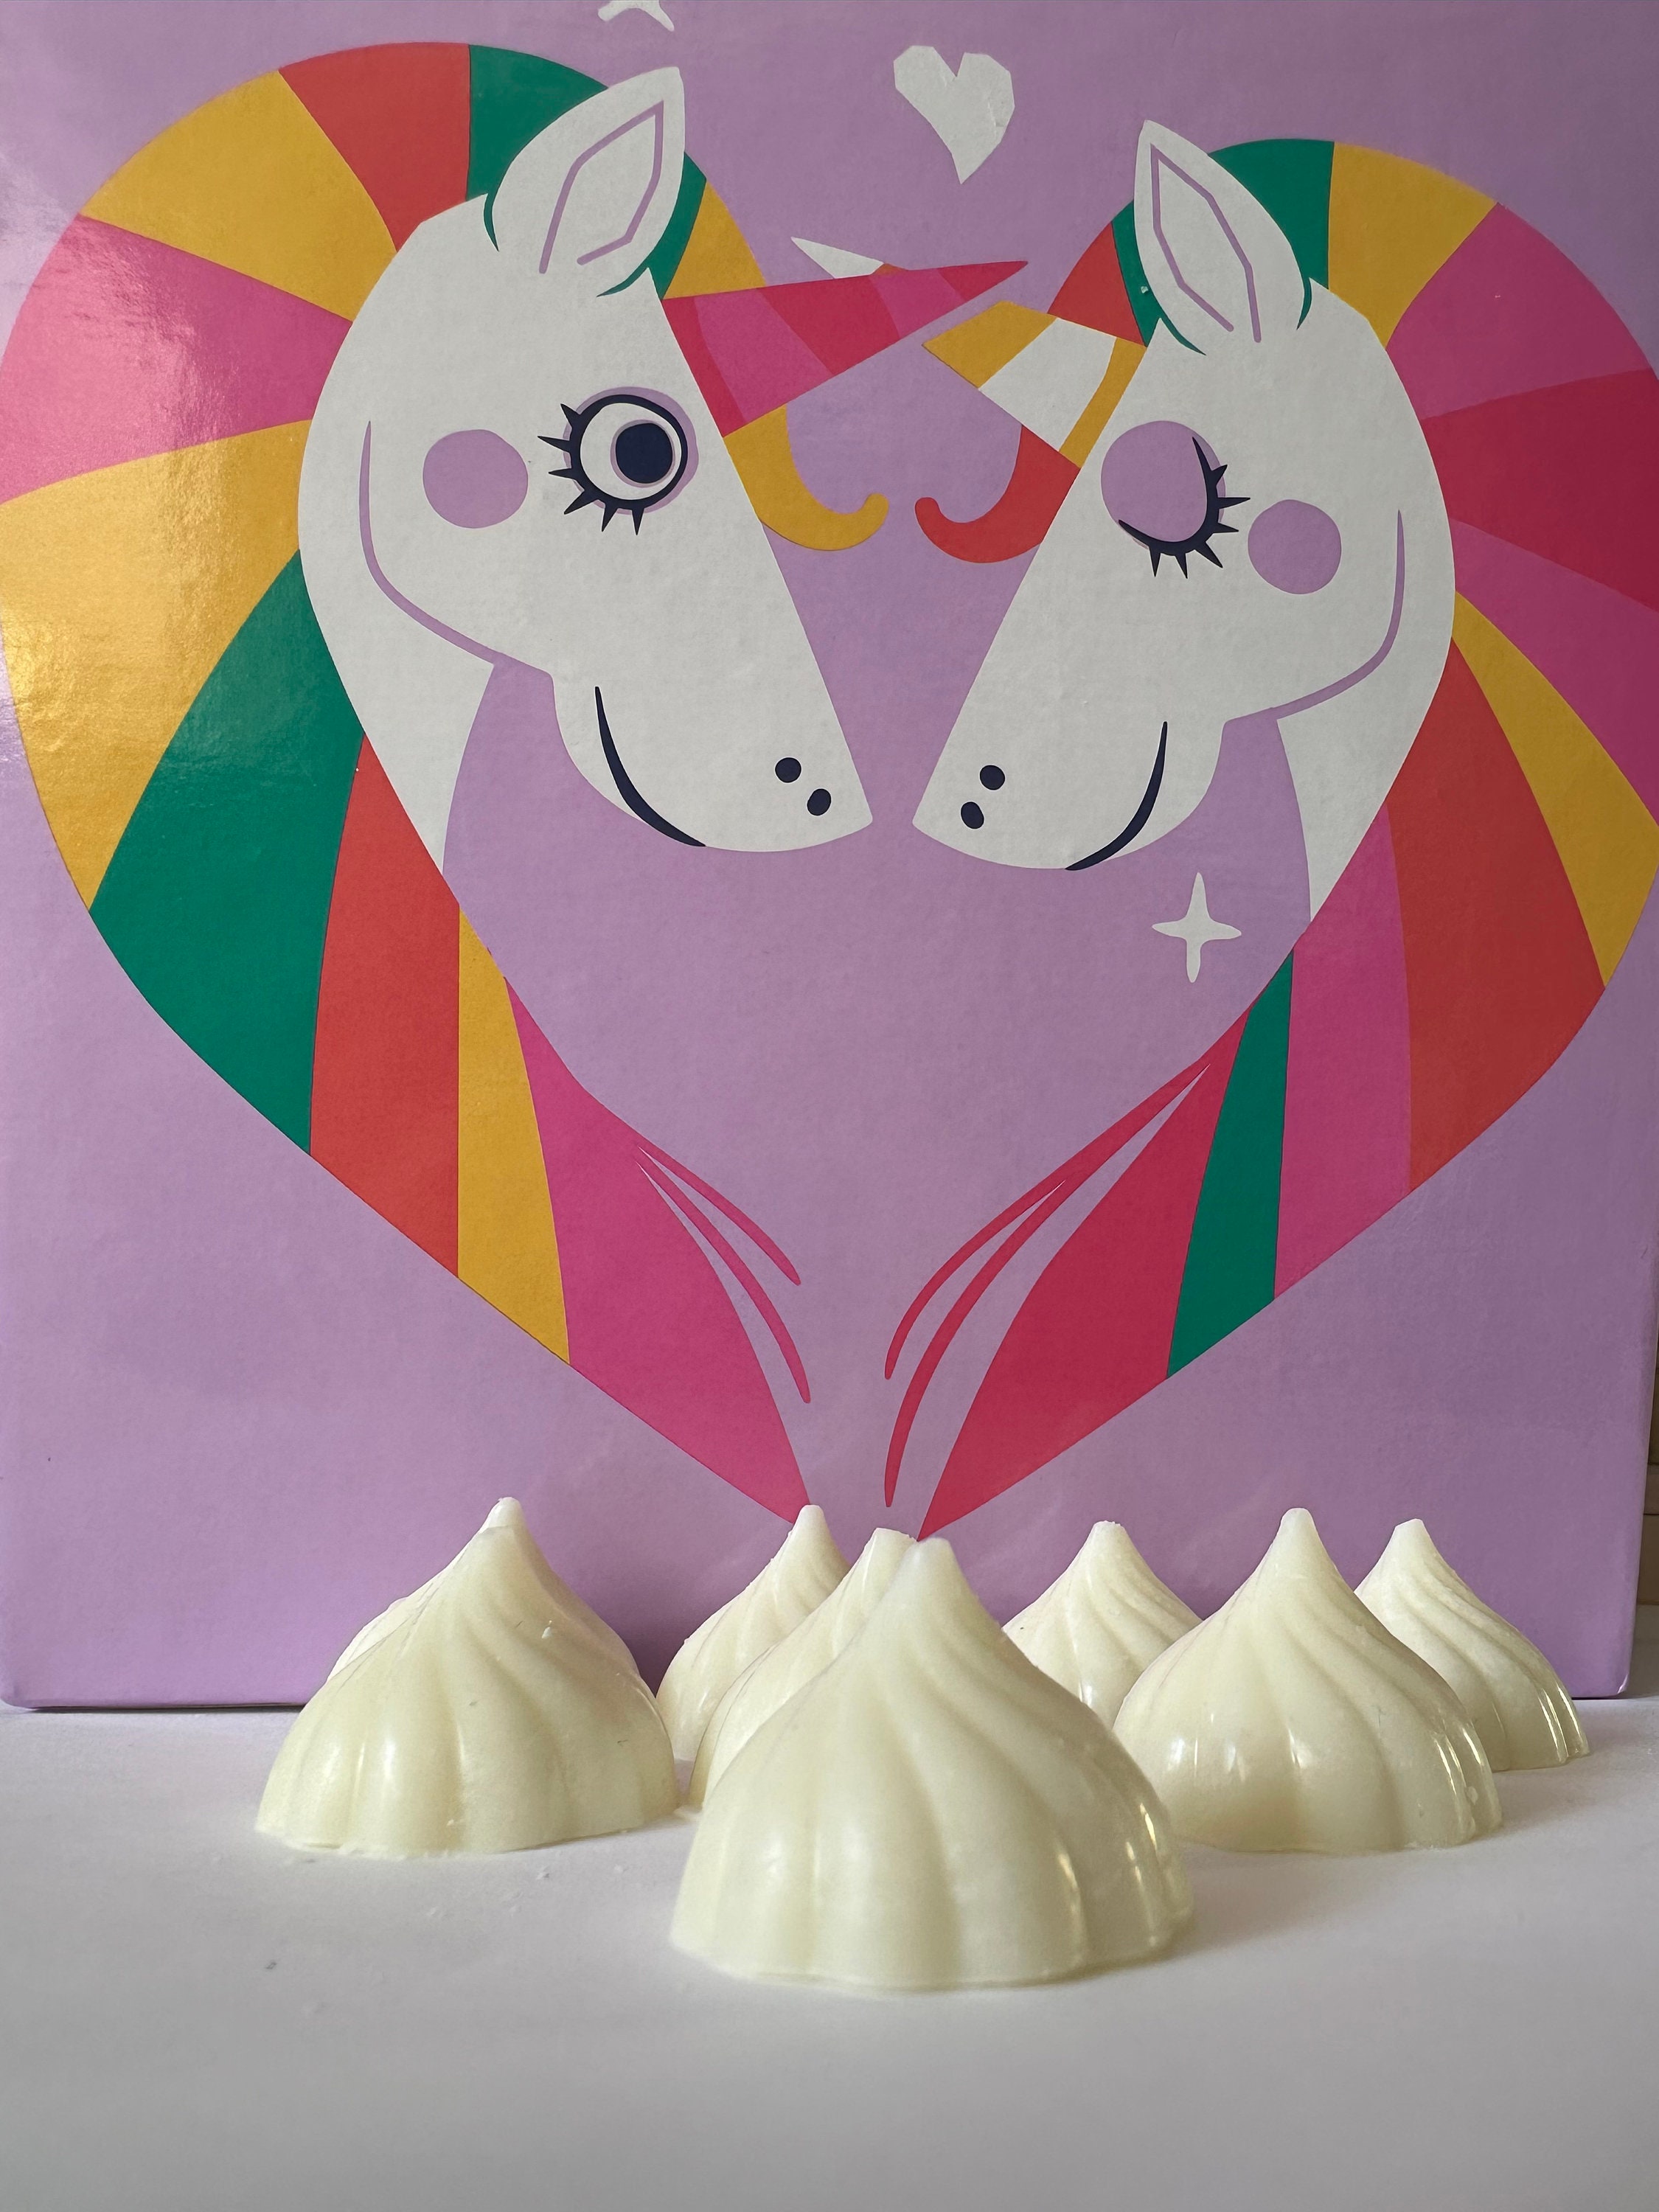 Passion Fruit Pineapple - Highly Scented Wax Melts – Southern Hospitality  Farm